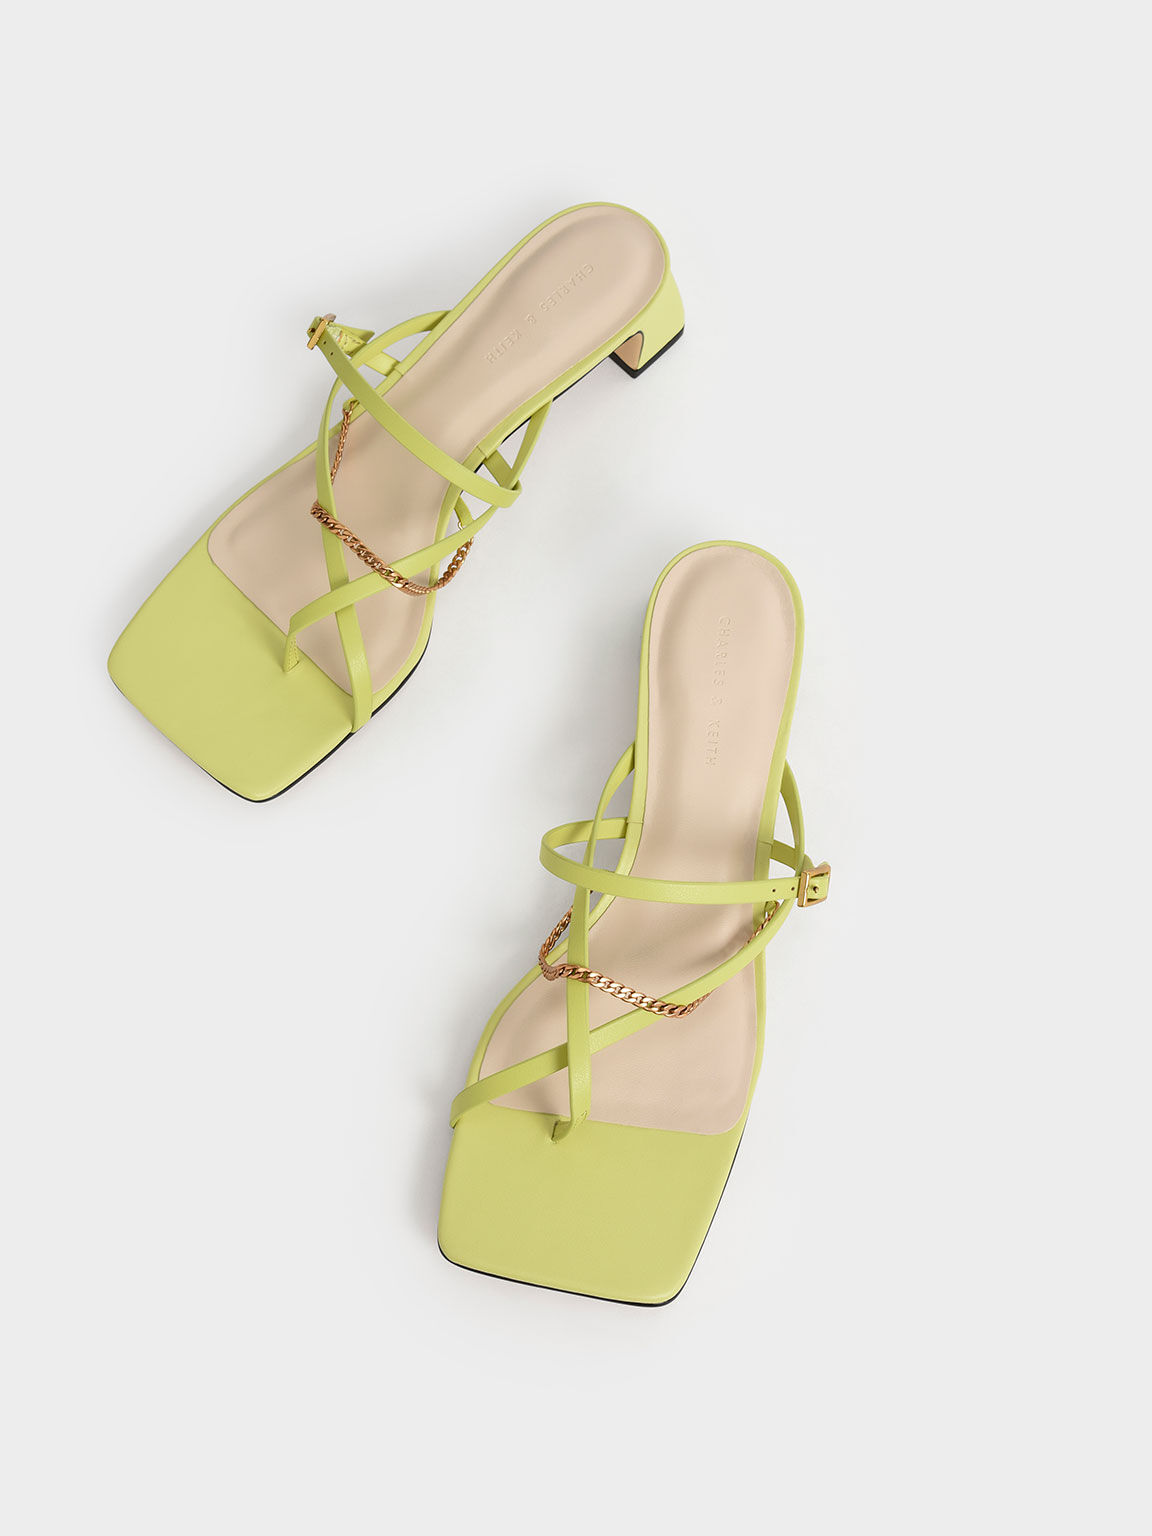 Chain Link Toe-Ring Sandals, Lime, hi-res